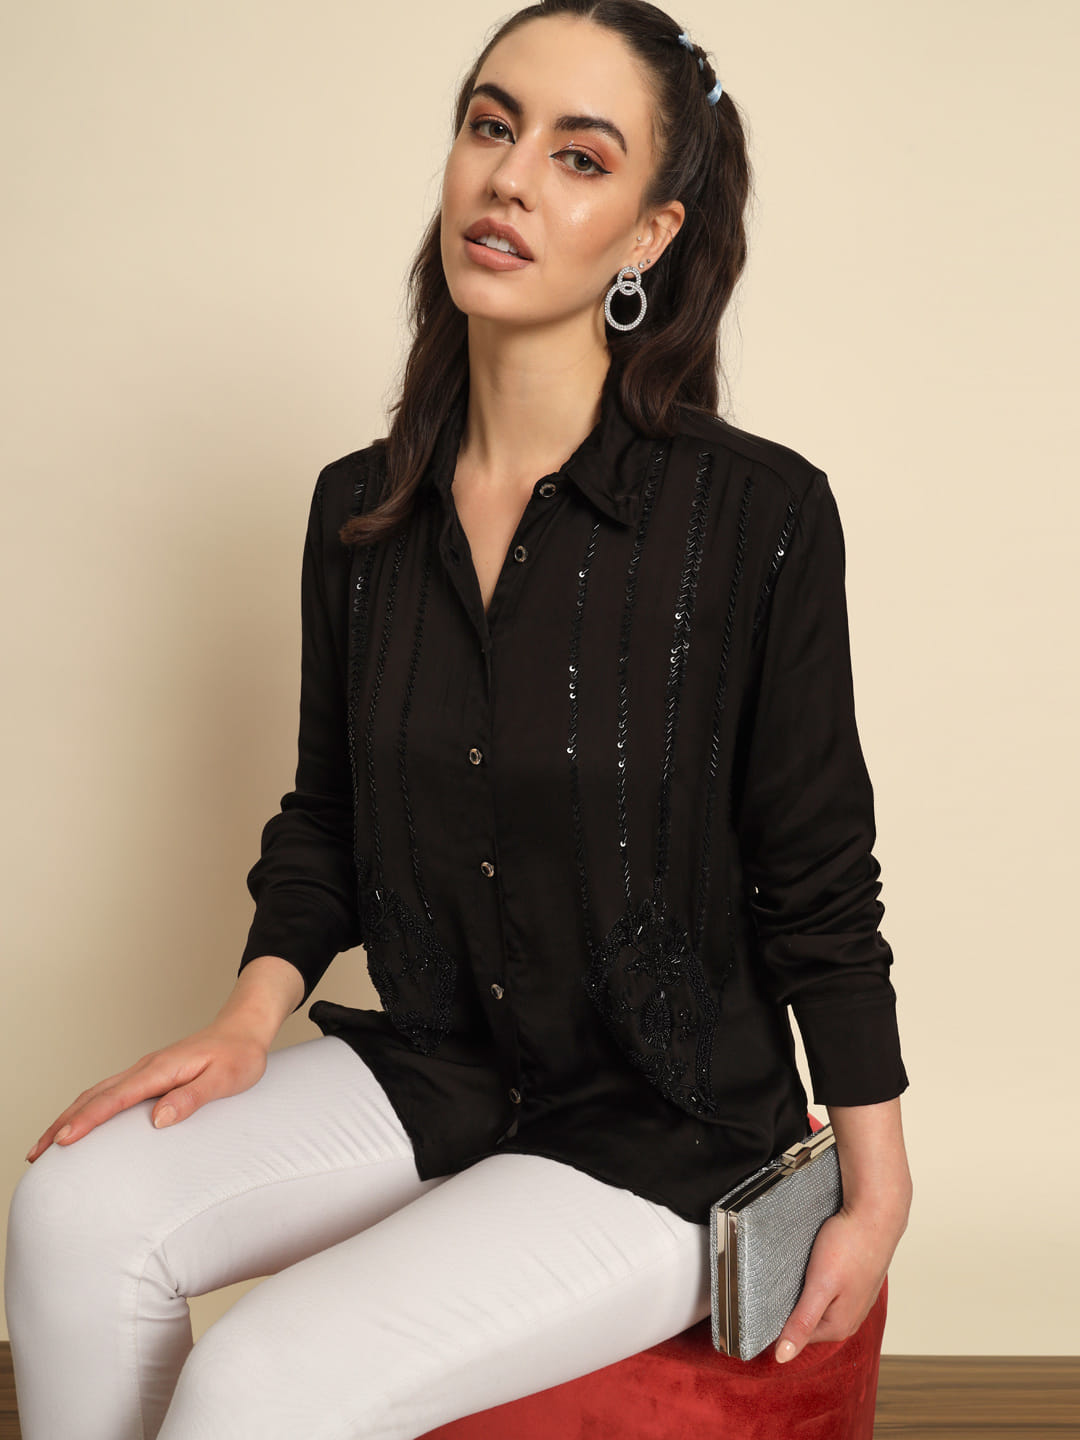 Celestial Intricacies: A Hand Embroidered Black Shirt